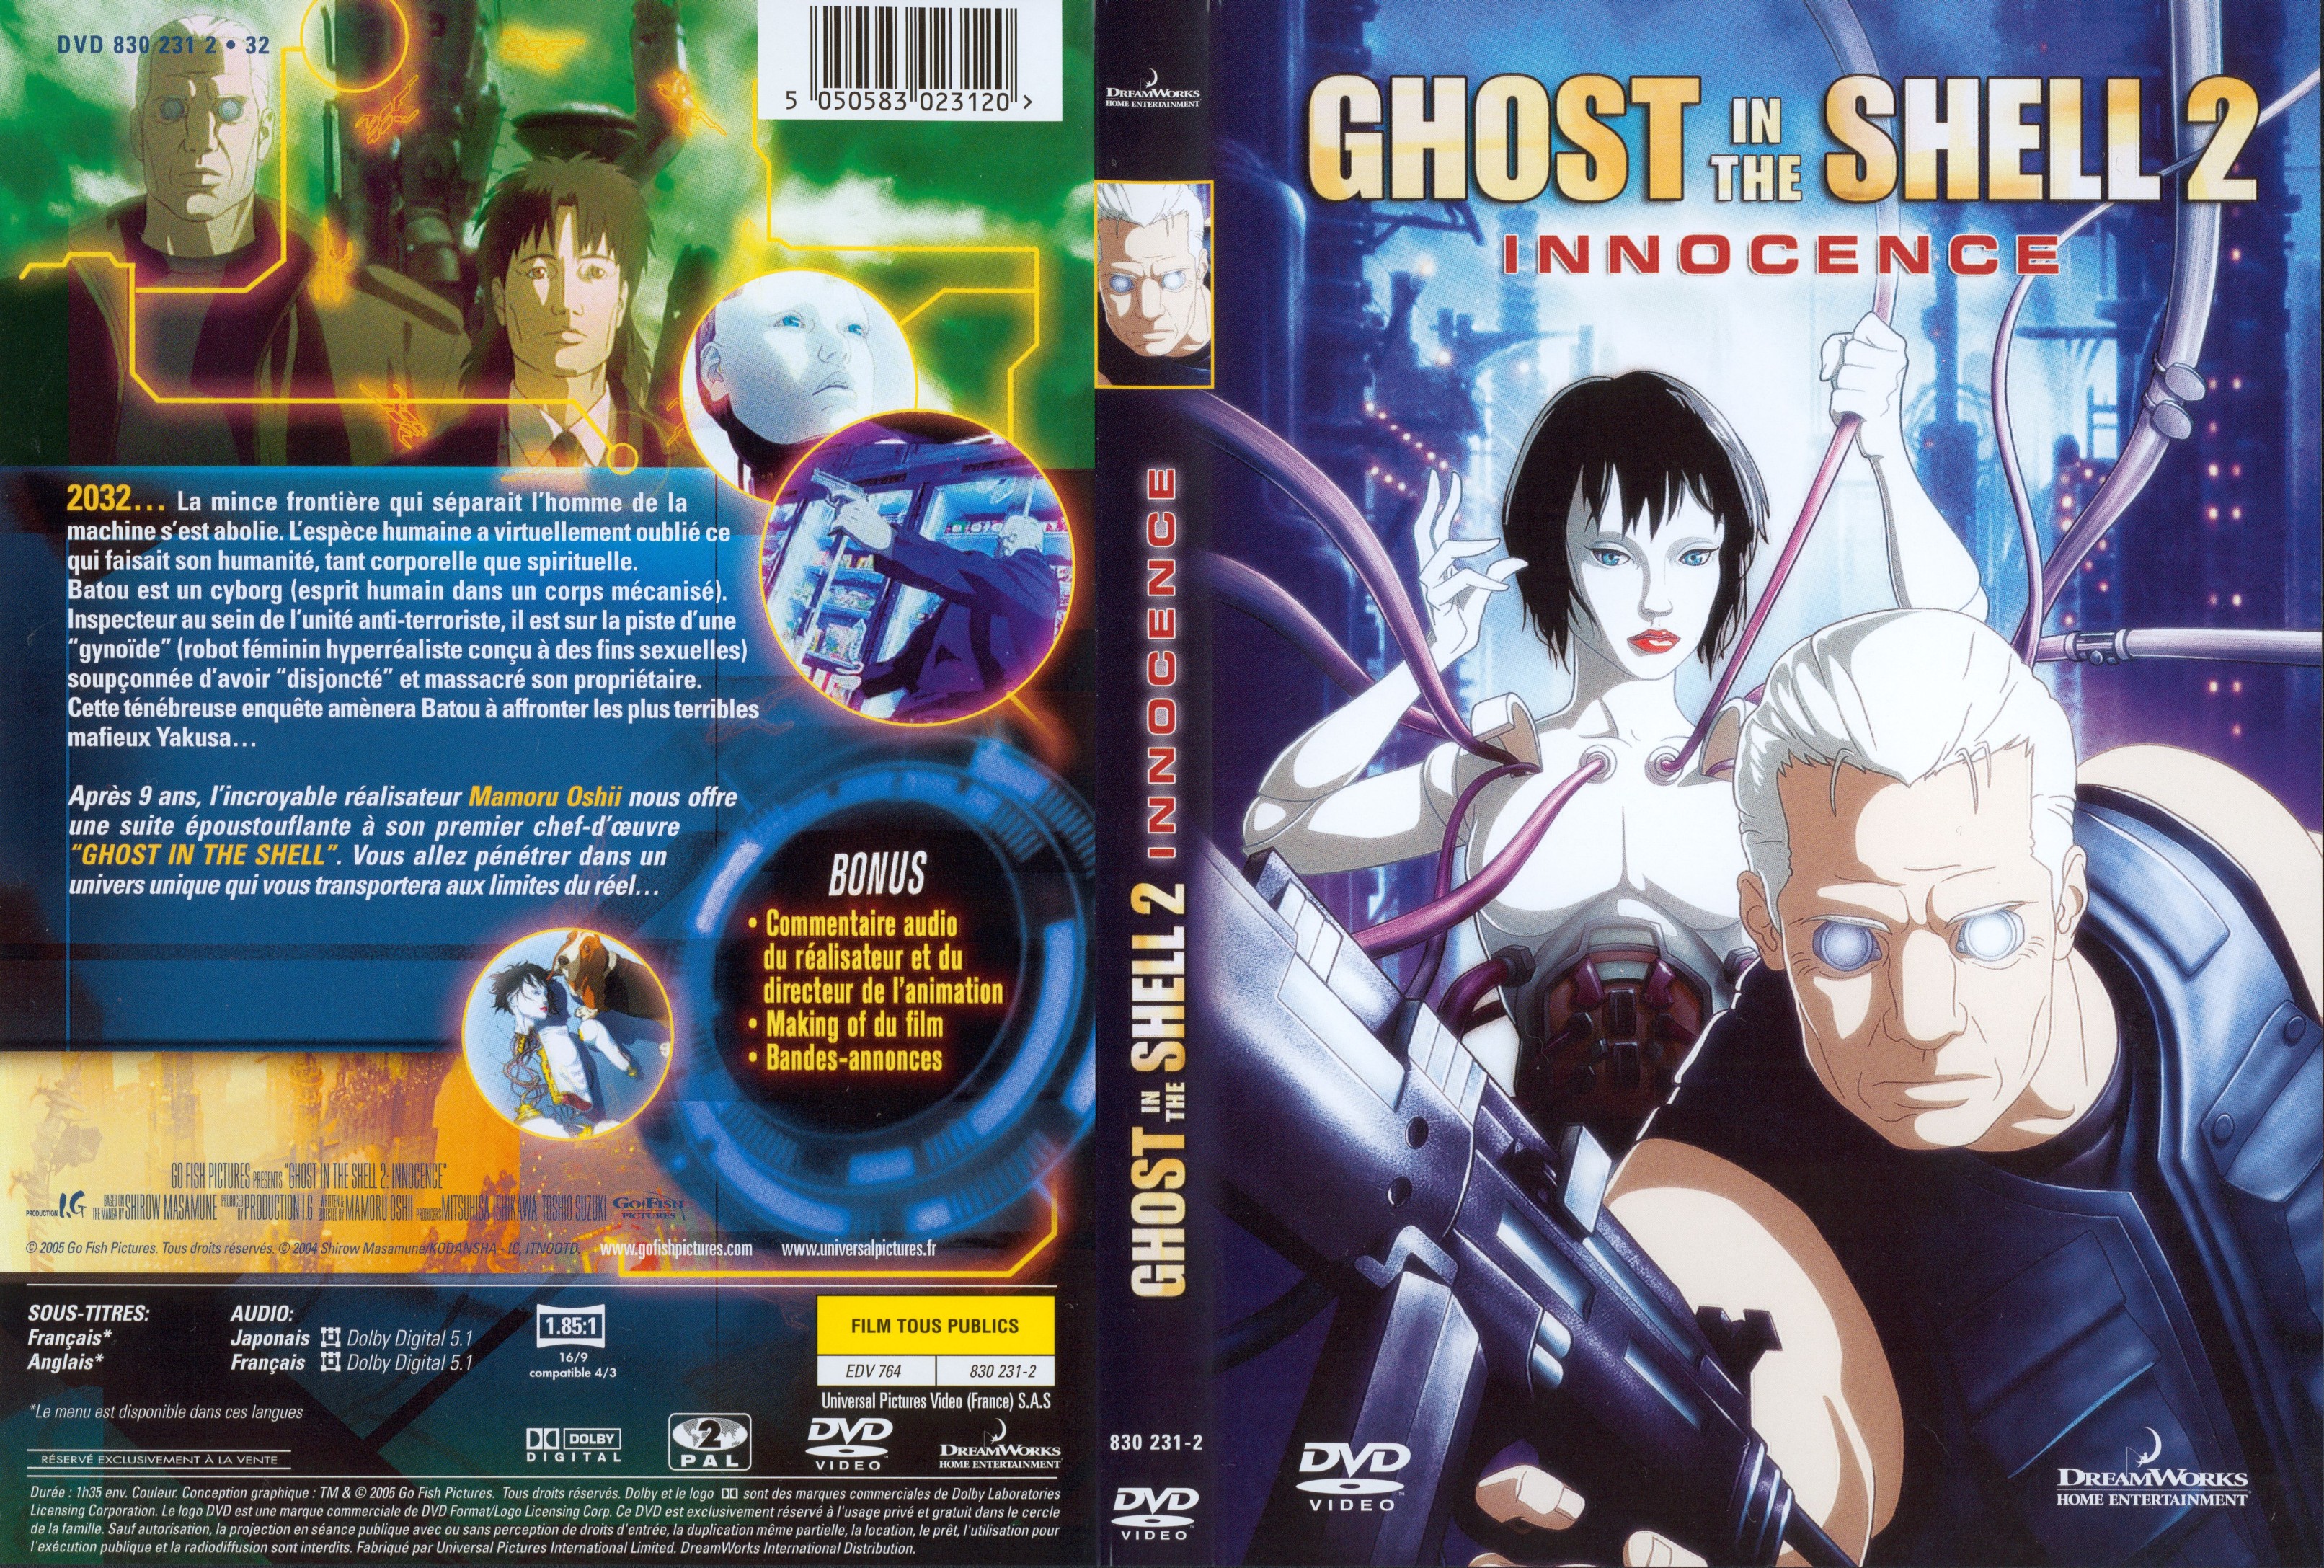 Jaquette DVD Ghost in the shell 2 Innocence